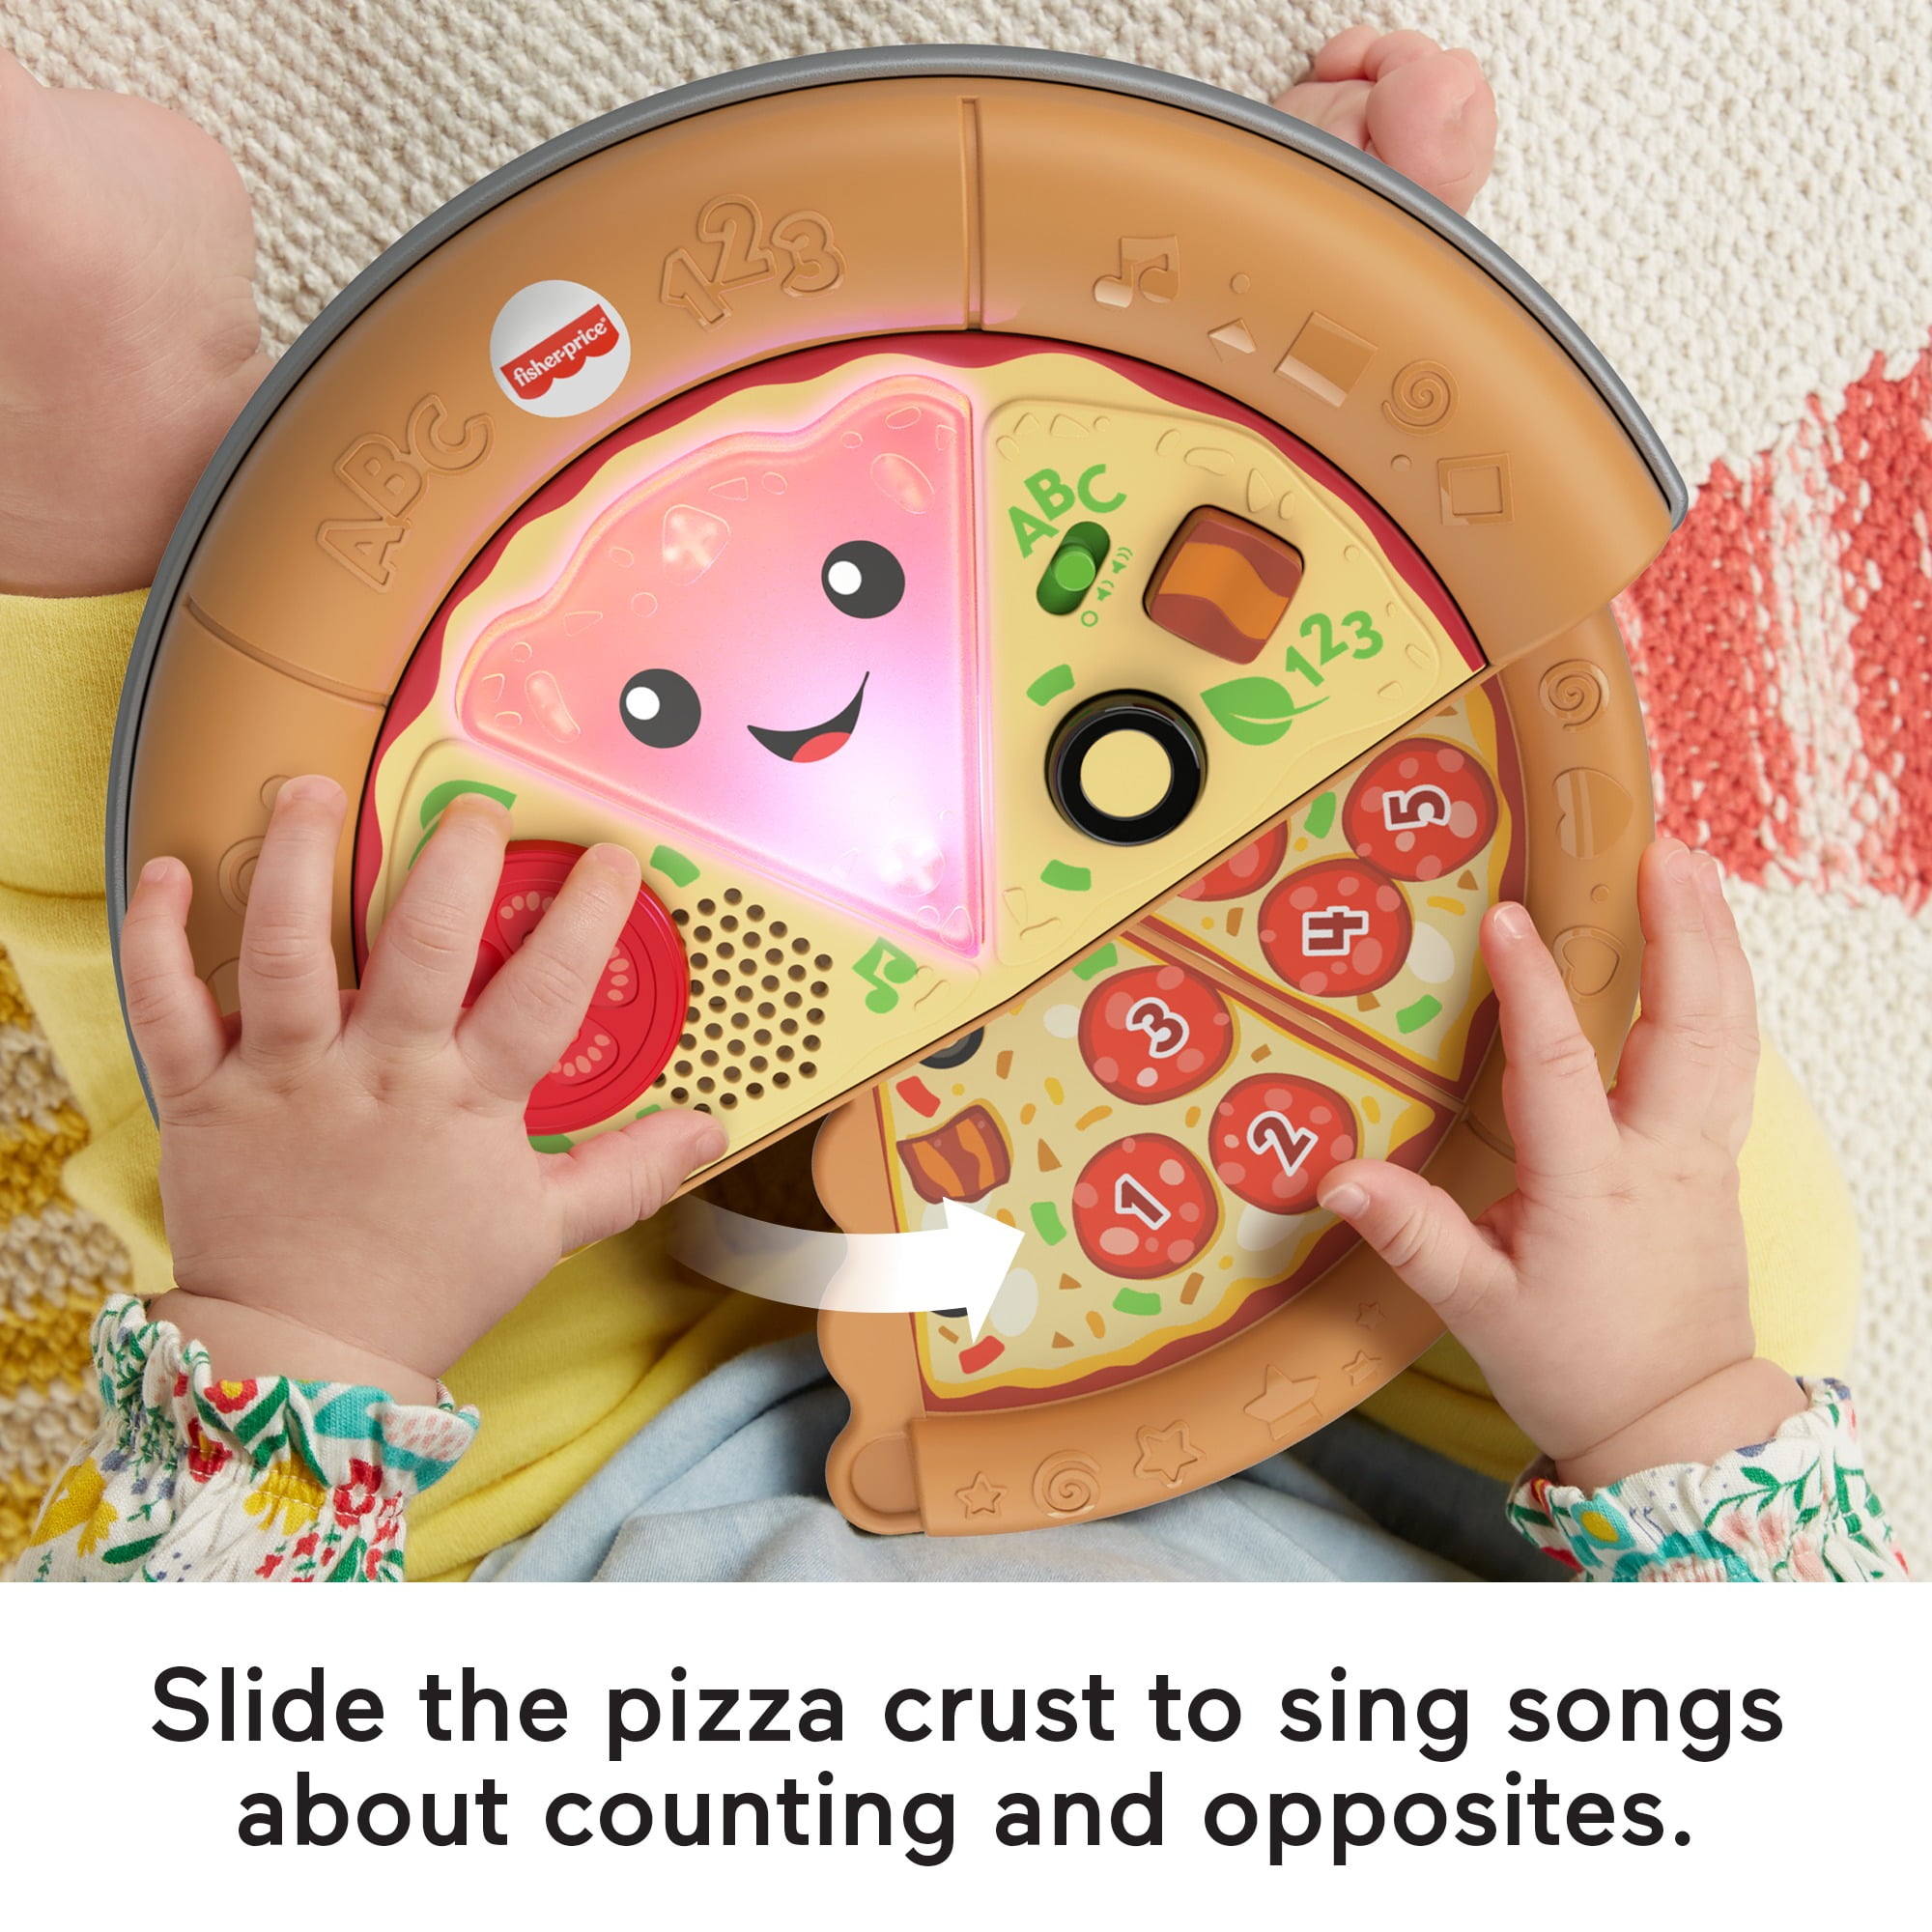 Fisher-Price Laugh & Learn Slice of Learning Pizza 